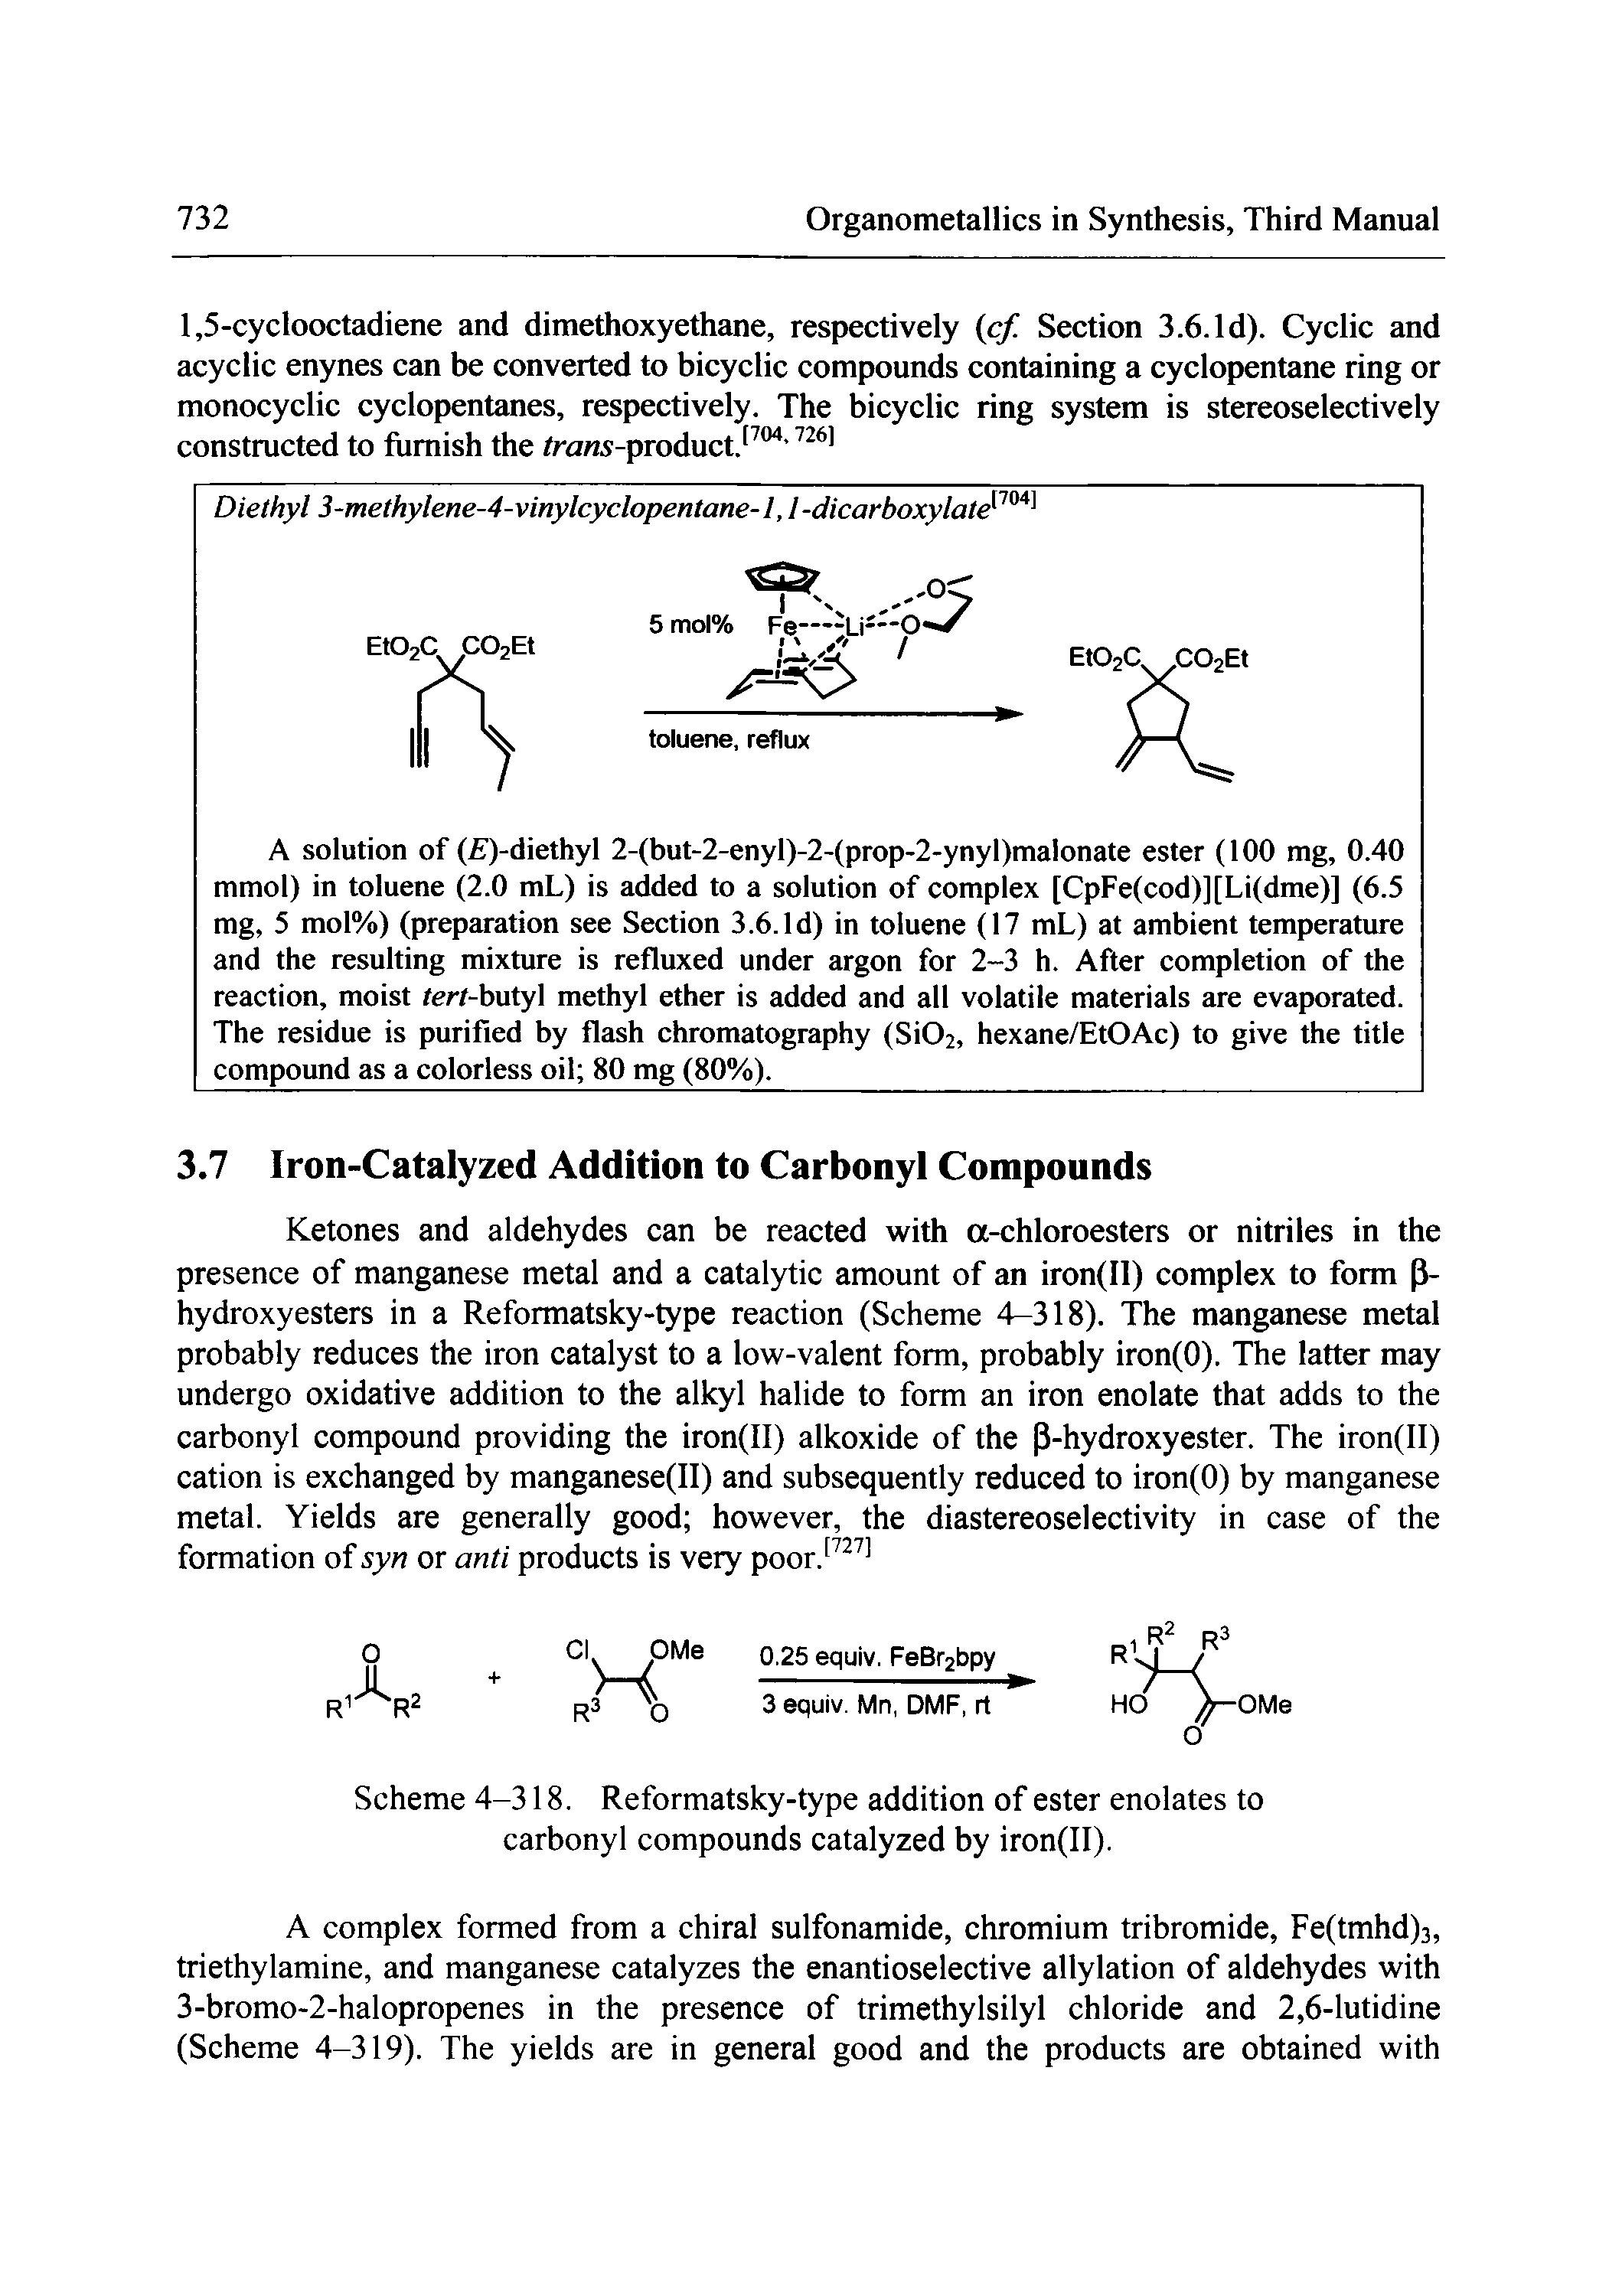 Scheme 4-318. Reformatsky-type addition of ester enolates to carbonyl compounds catalyzed by iron(II).